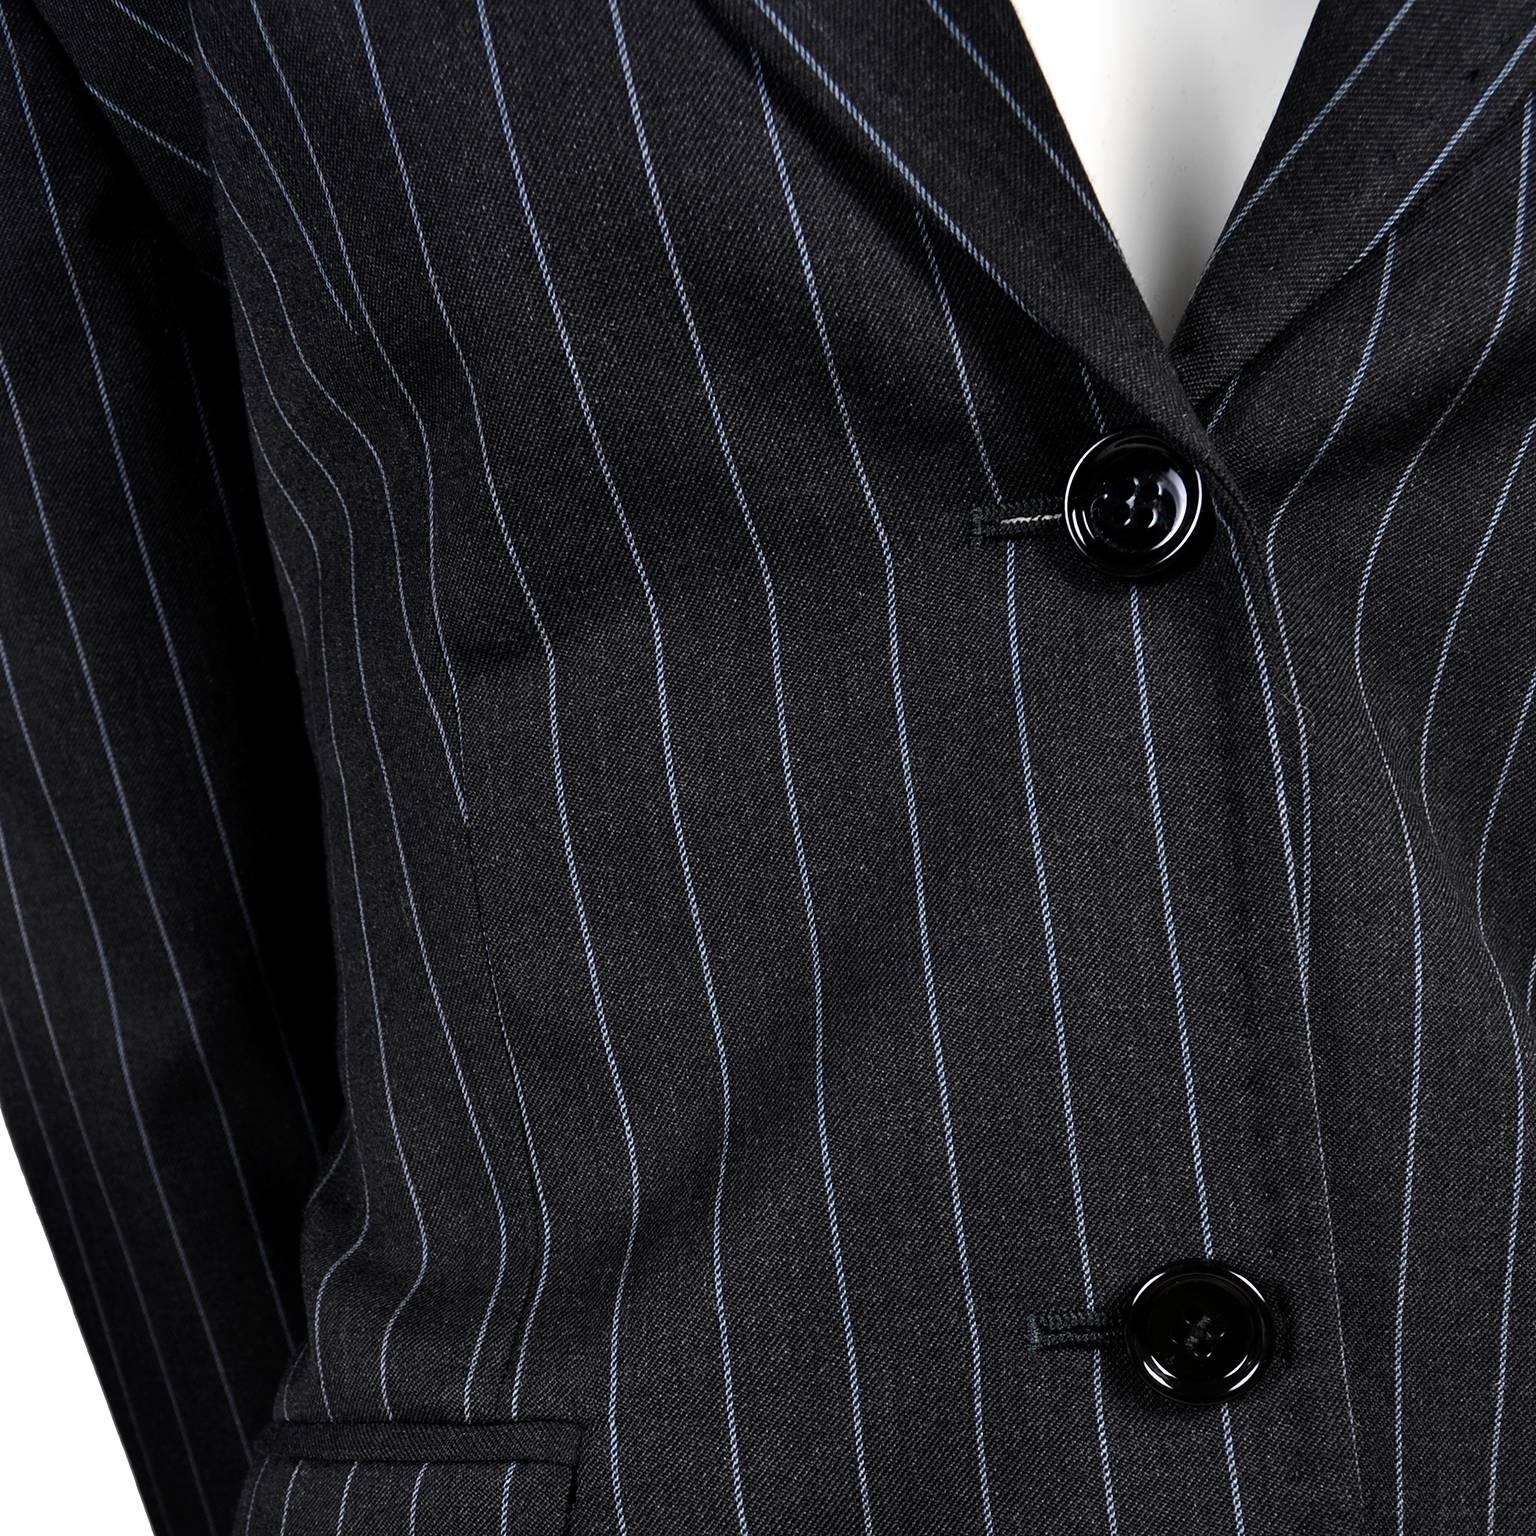 This is a gorgeous pantsuit from Dolce and Gabbana made of 100% virgin wool. It is a beautiful dark charcoal gray/black, with light blue pinstripes running vertically. This women's suit has a two button blazer and matching trouser pants. The jacket